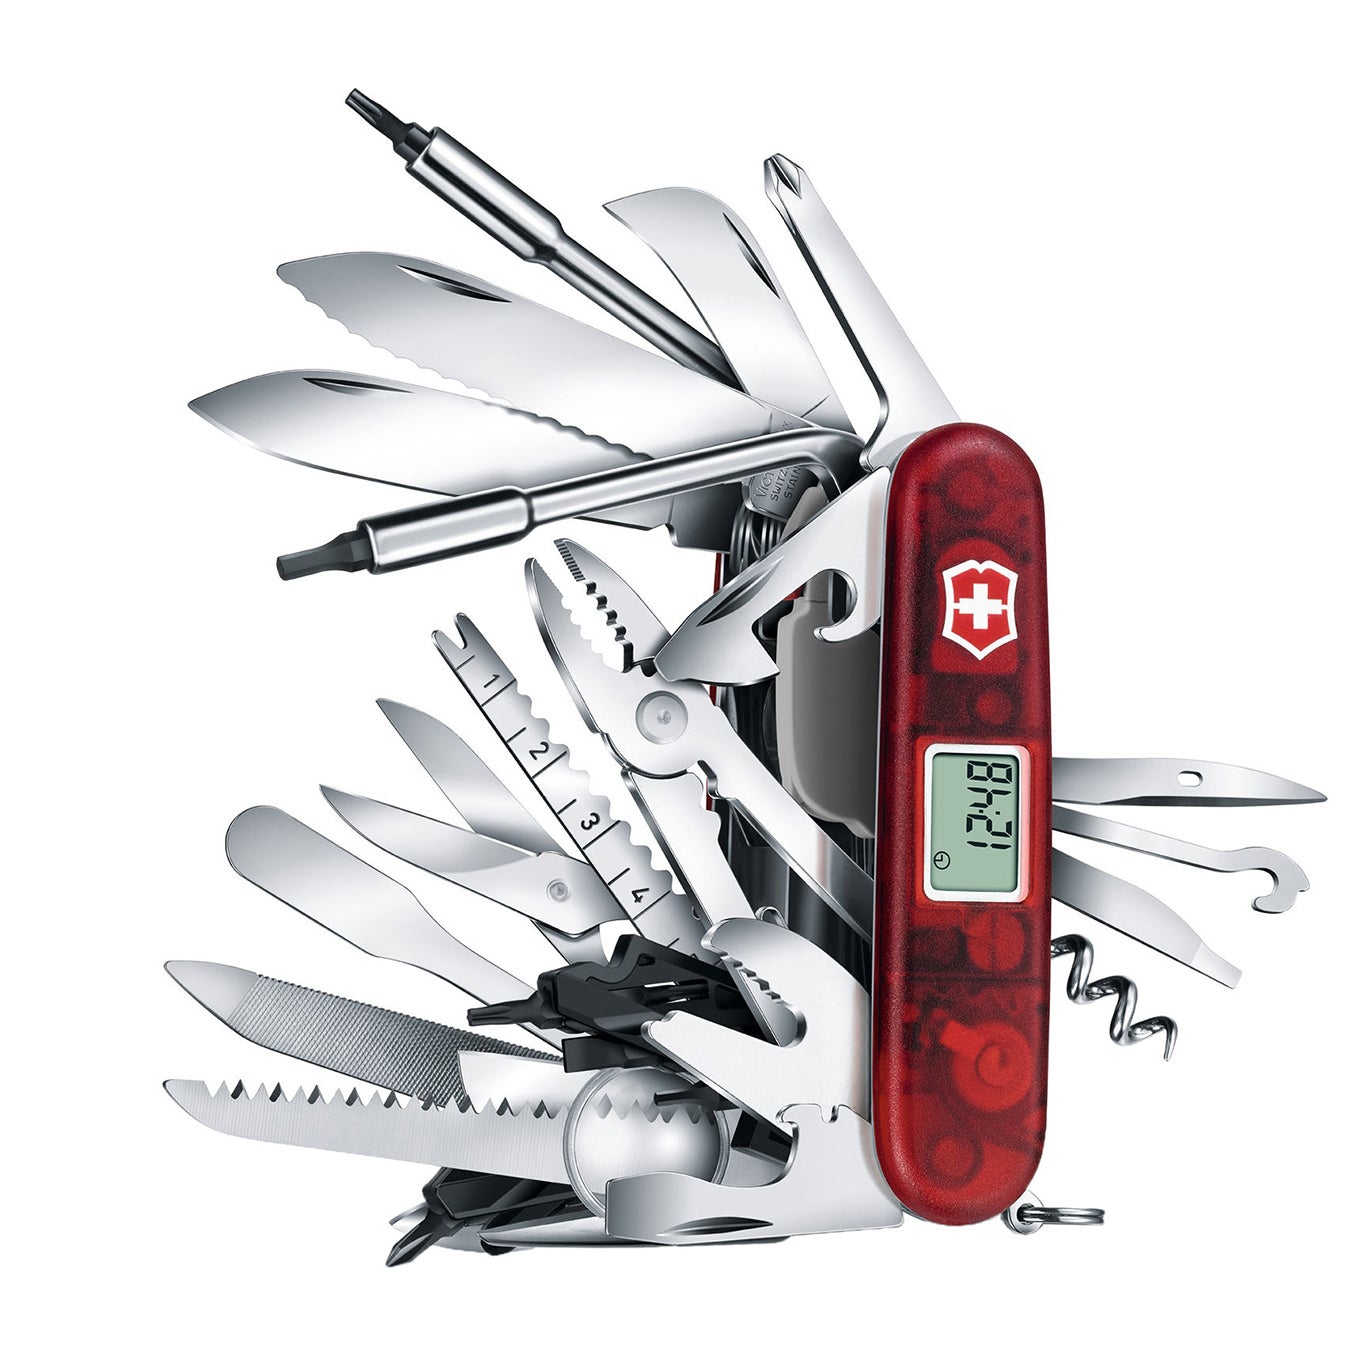 Some Different Knife Sharpeners for a Victorinox Knife (And Other